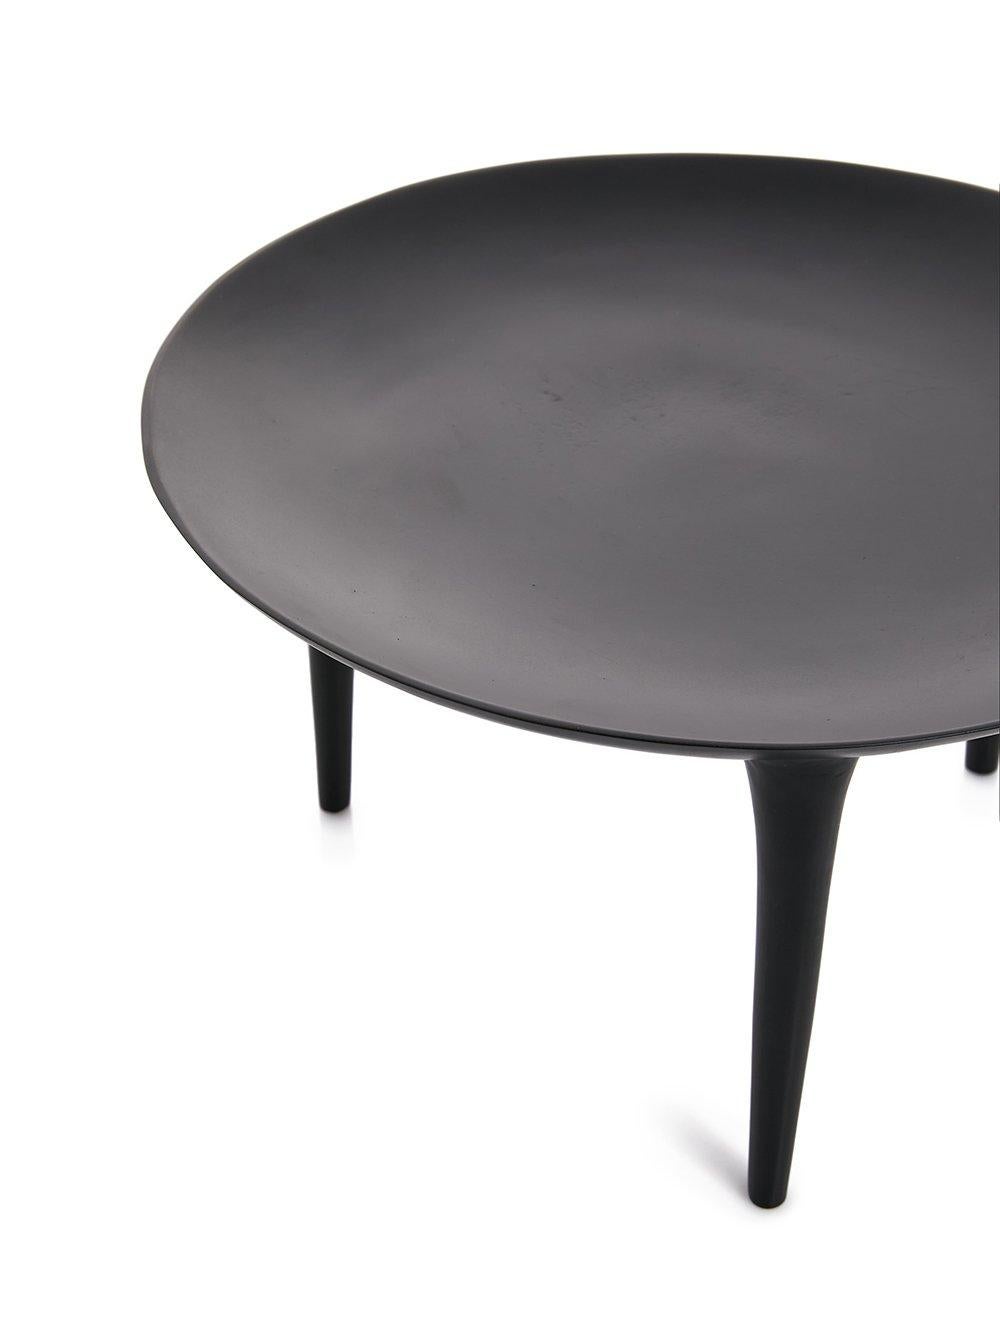 Rick Owens Brazier in Black Bronze.
Three-legged table with polished surface.